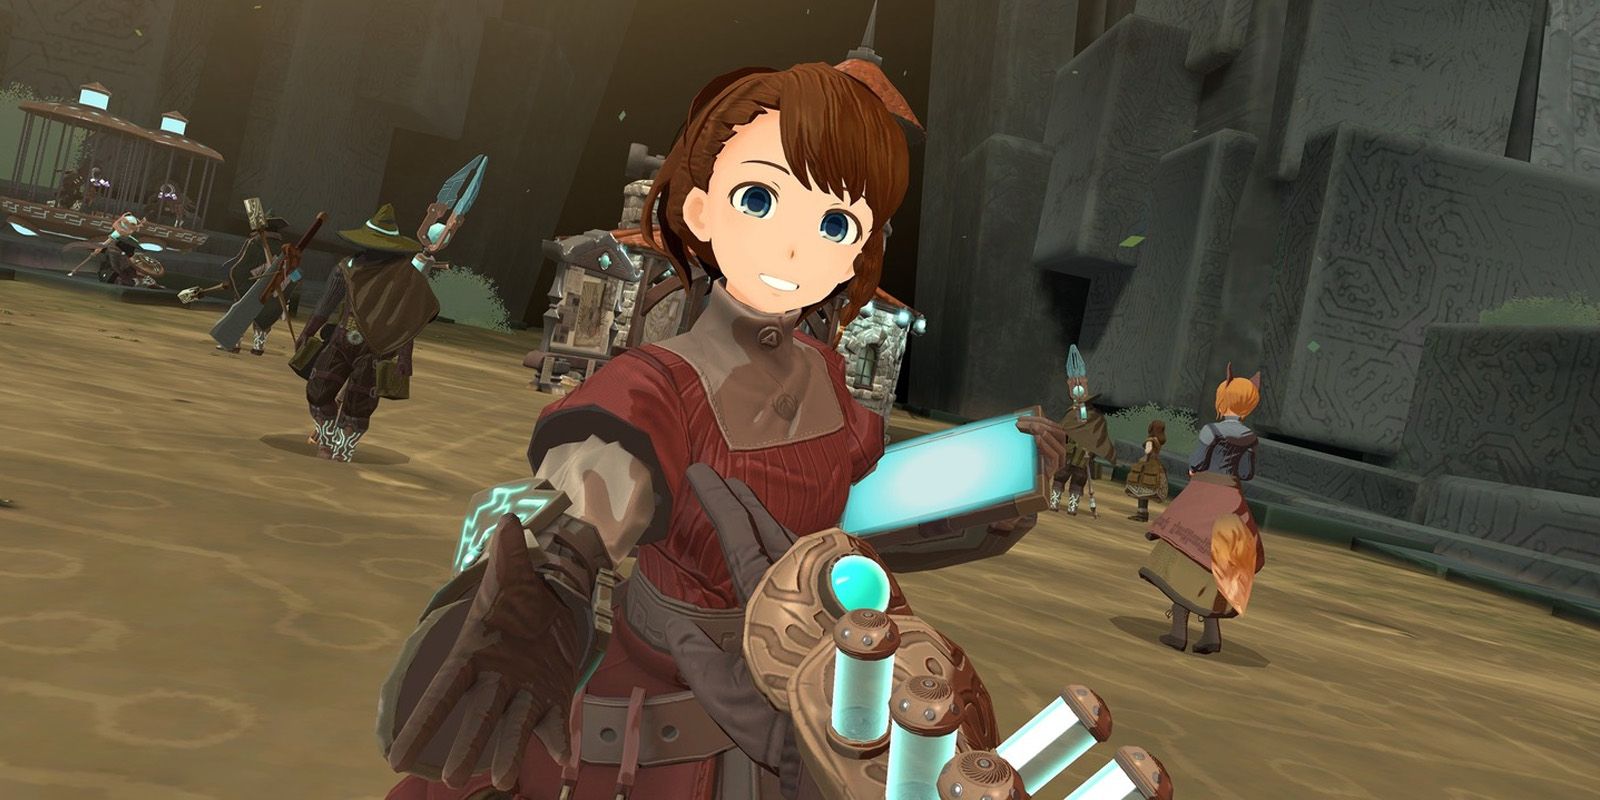 A female anime character reaching out a hand towards the player's perspective in VR game RUINSMAGUS.